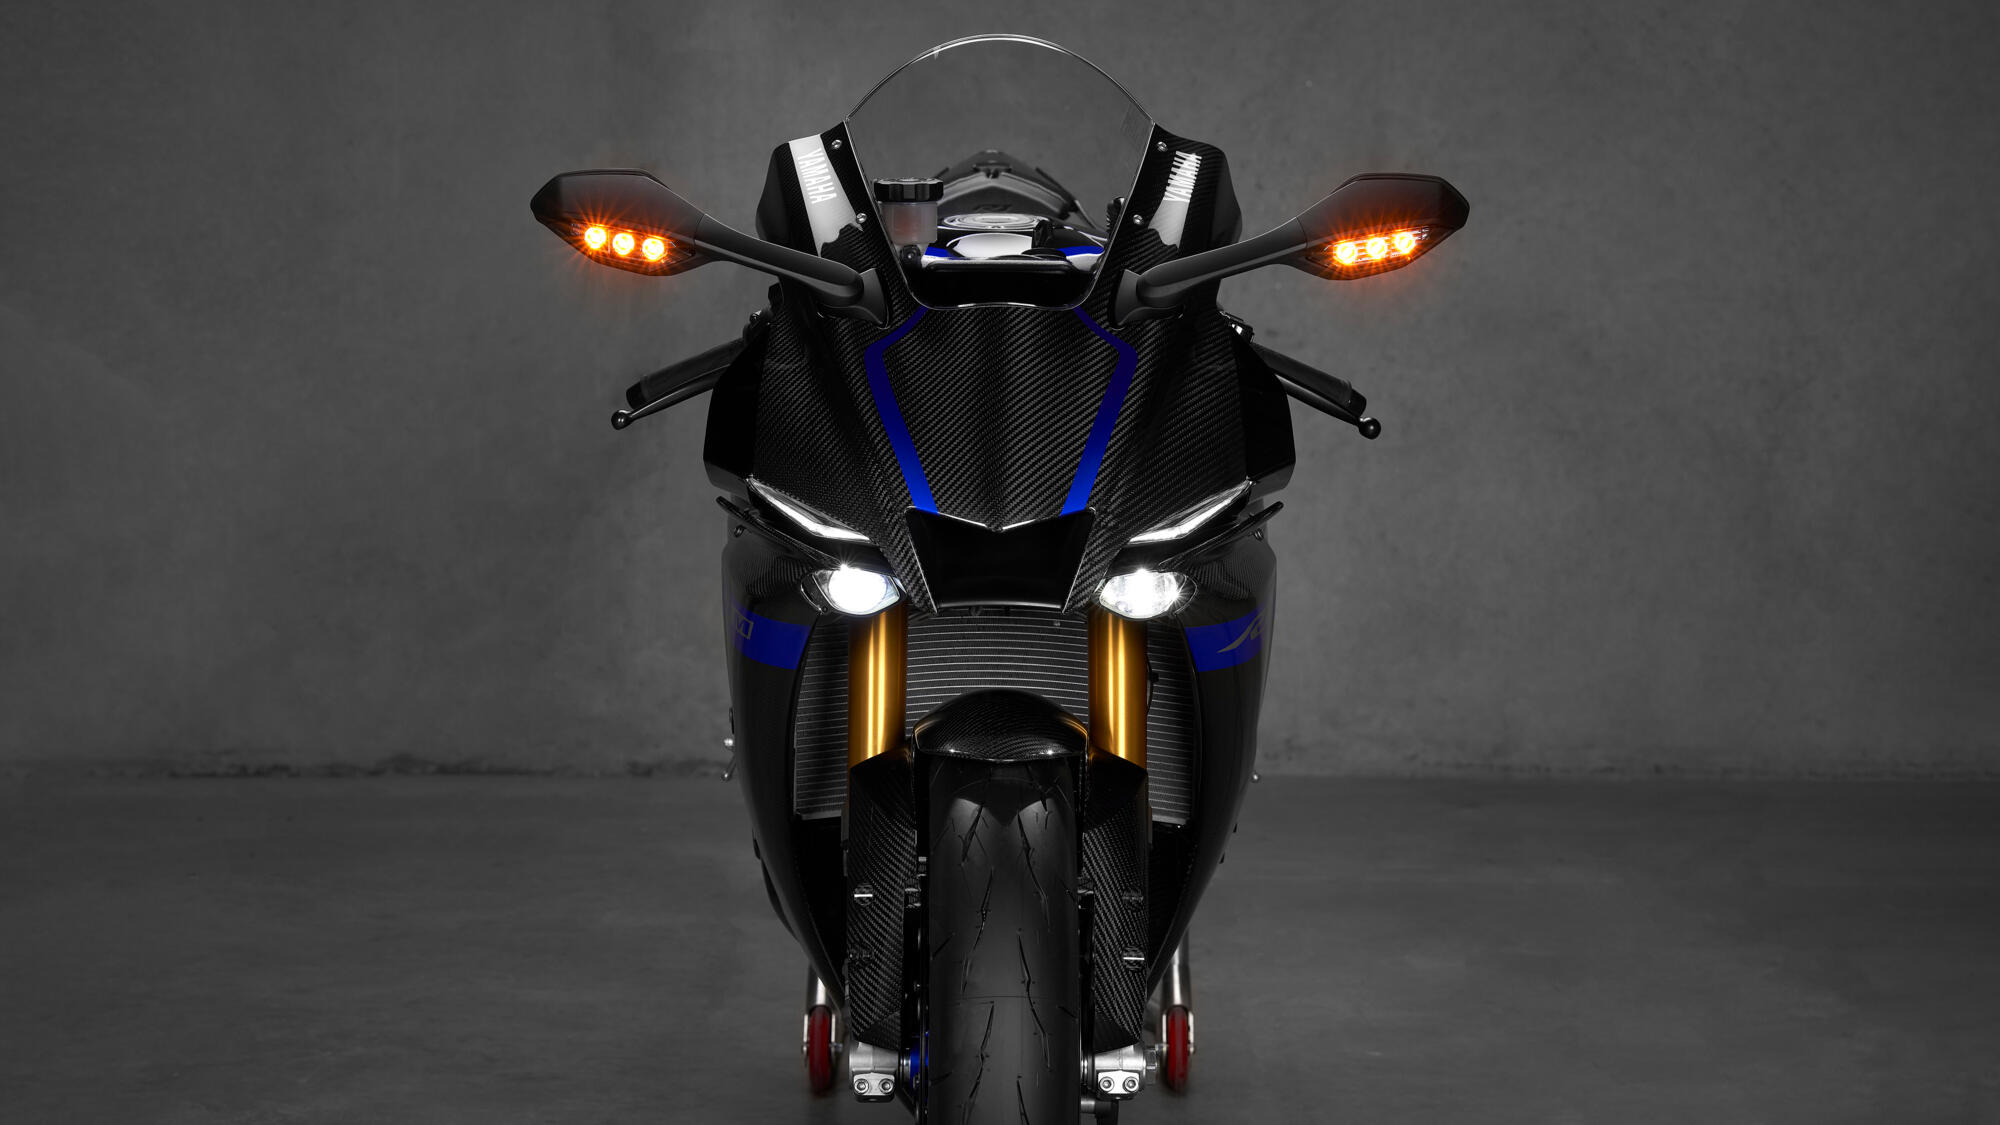 Next generation Yamaha R1 to arrive by end of the year? Visordown